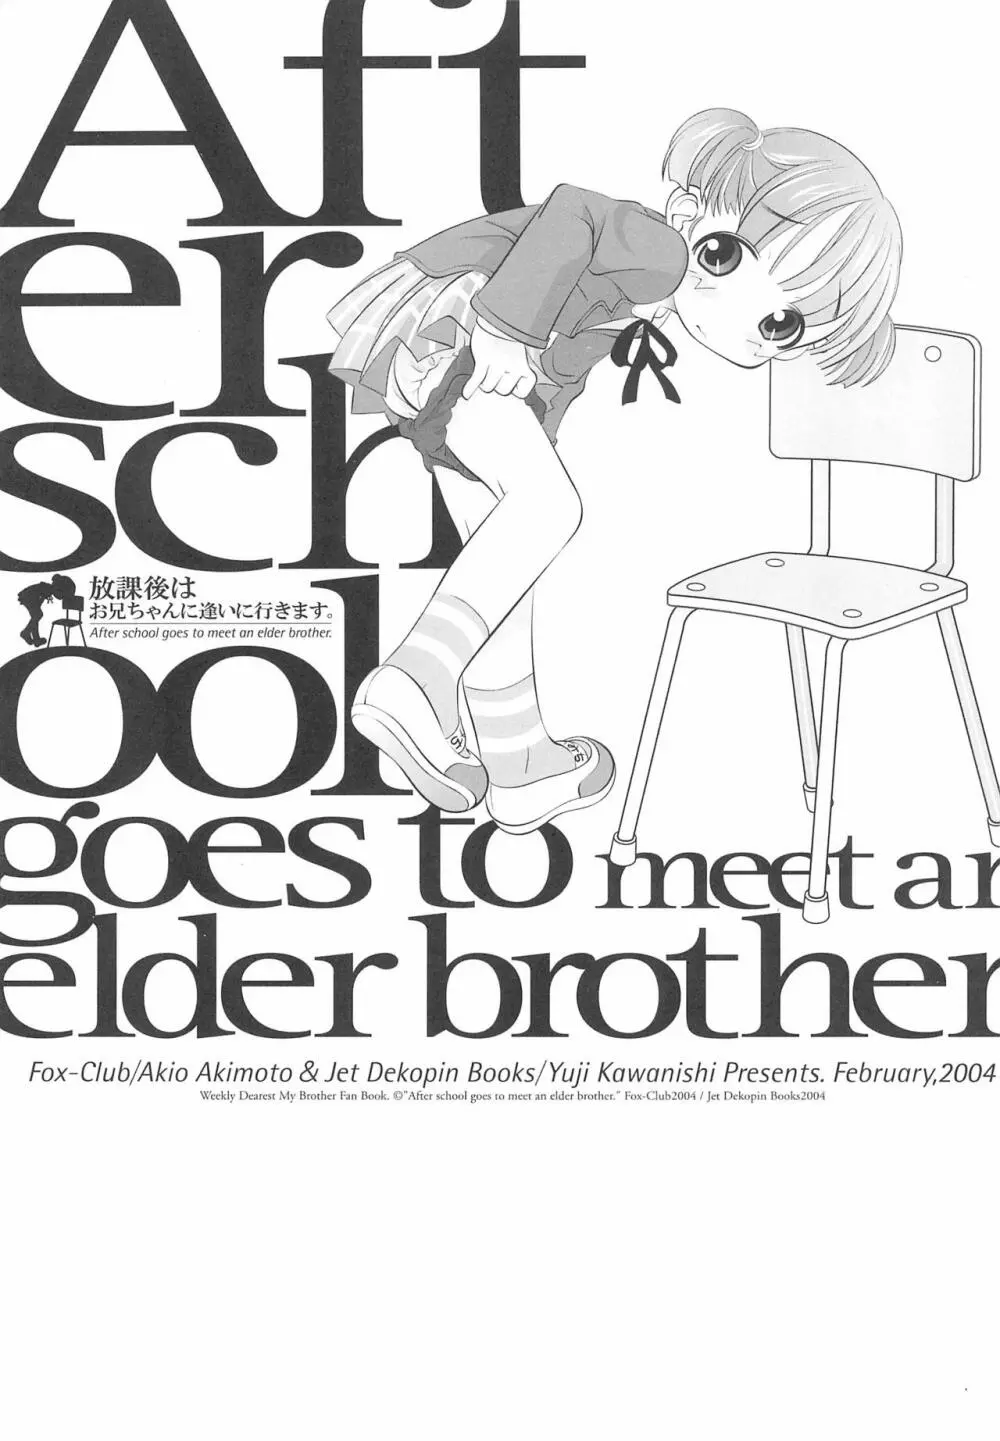 After School Goes To Meet An Elder Brother 放課後はお兄ちゃんに逢いに行きます。